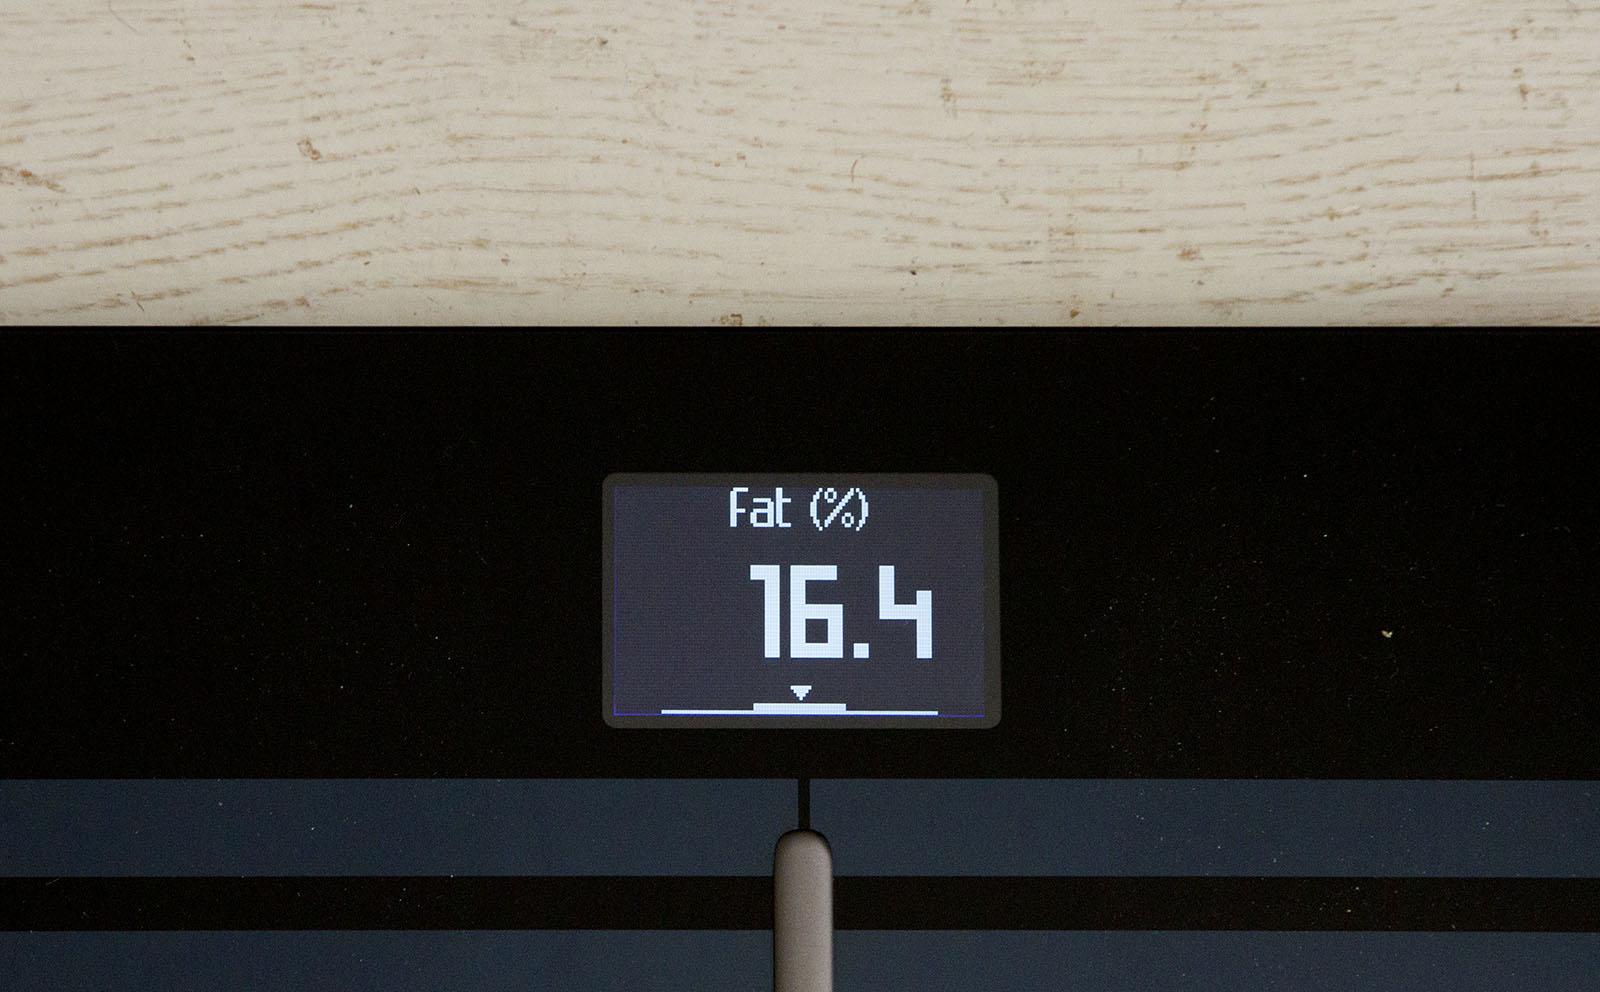 Withings Body Cardio review: stylish scales for health obsessives